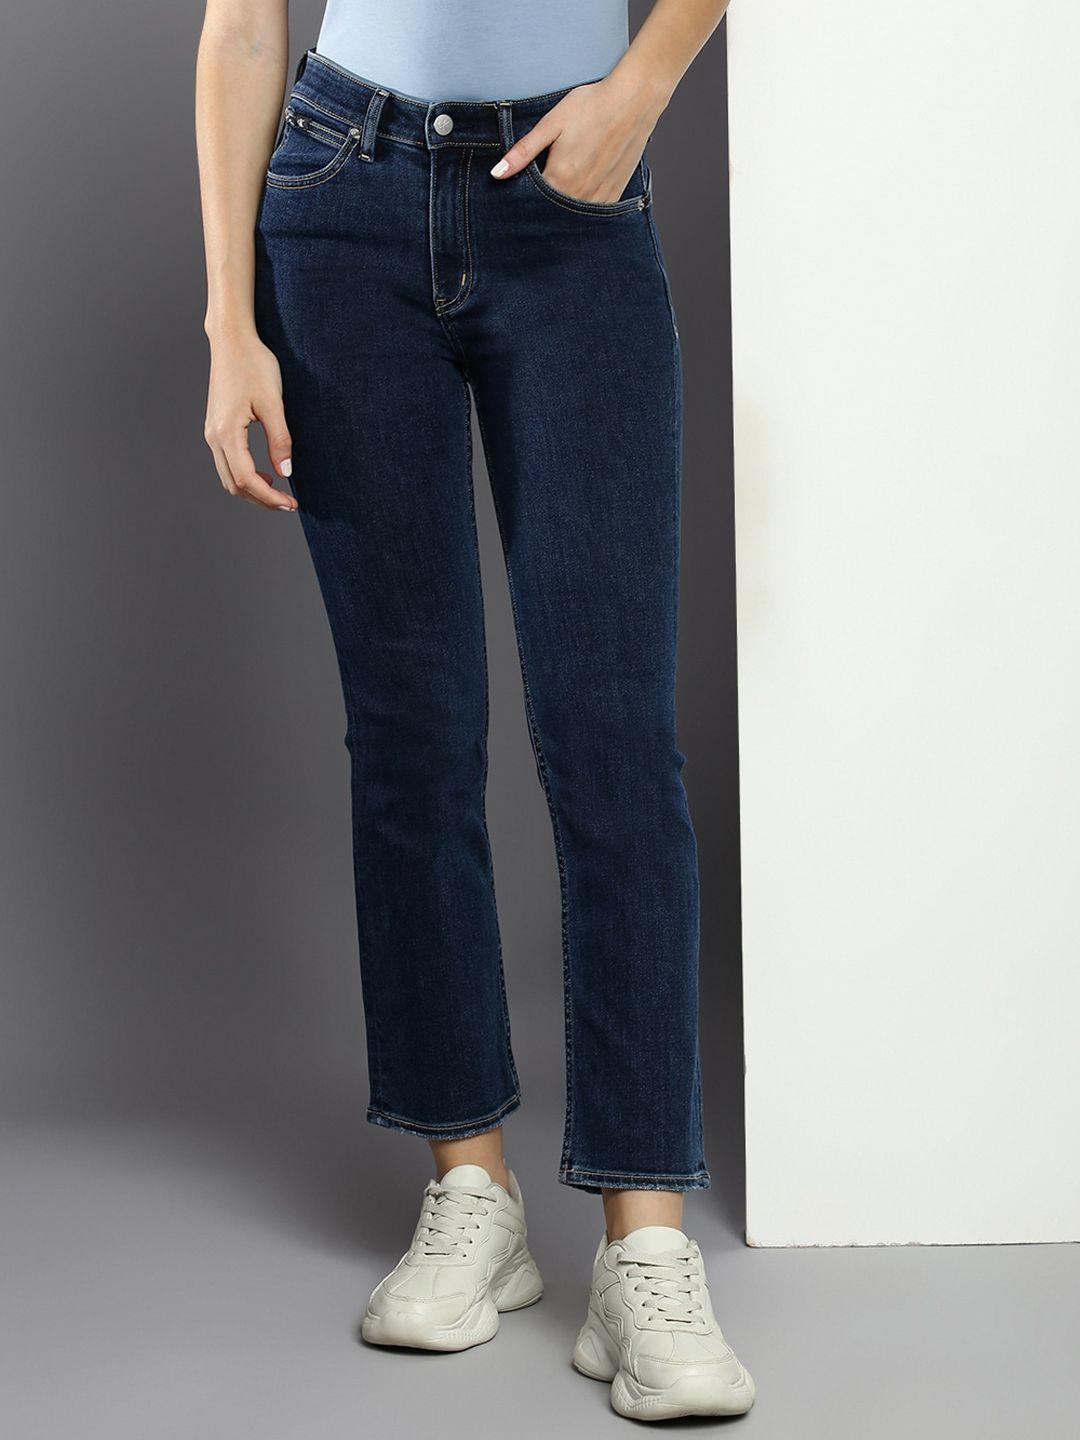 calvin klein jeans women slim fit high-rise stretchable jeans